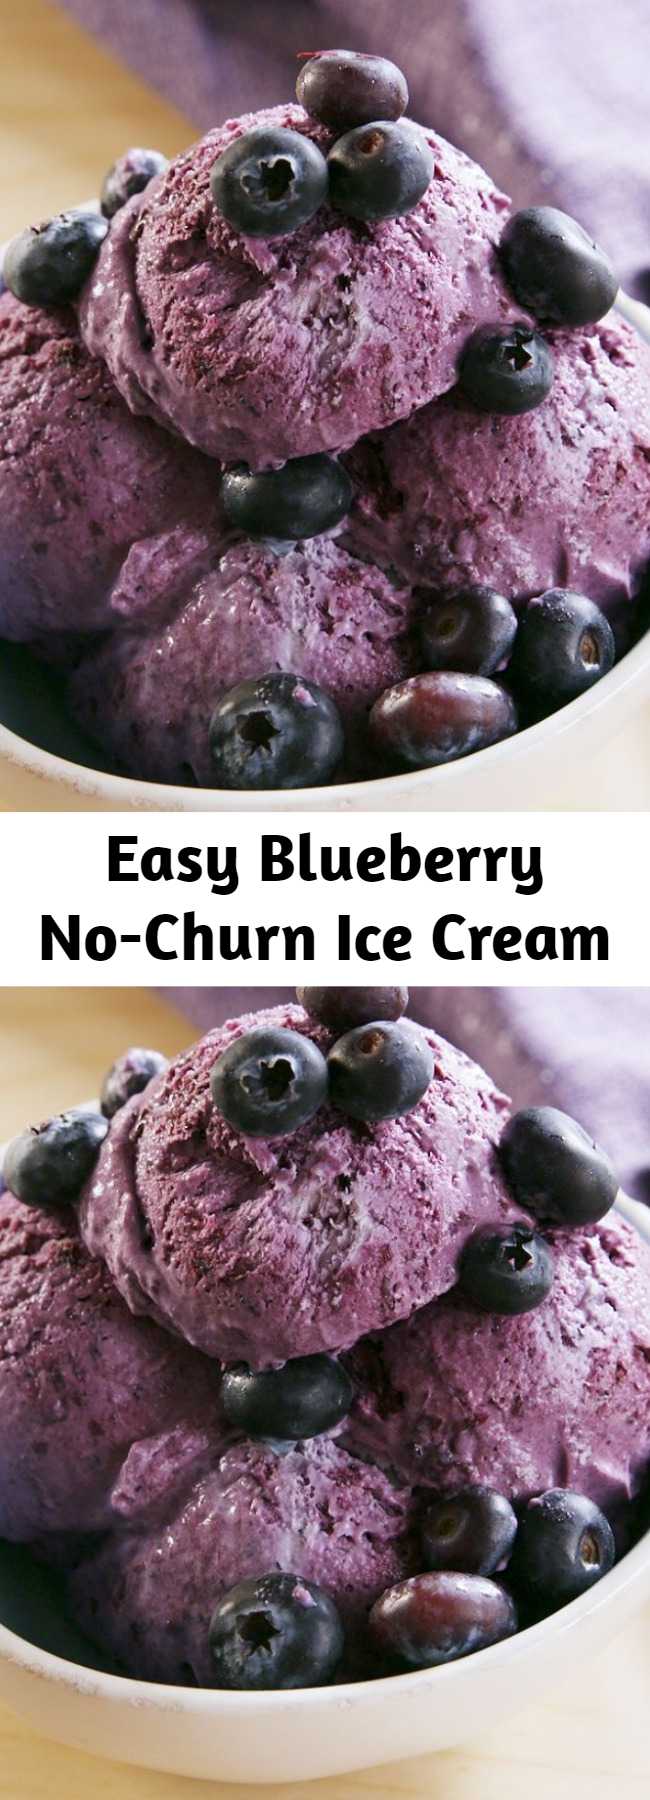 Blueberry No-Churn Ice Cream Recipe - Find homemade ice cream intimidating? Relax! This no-churn recipe couldn't be easier. Bonus: it works with just about every berry! #easyrecipe #recipe #blueberry #icecream #nochurn #homemade